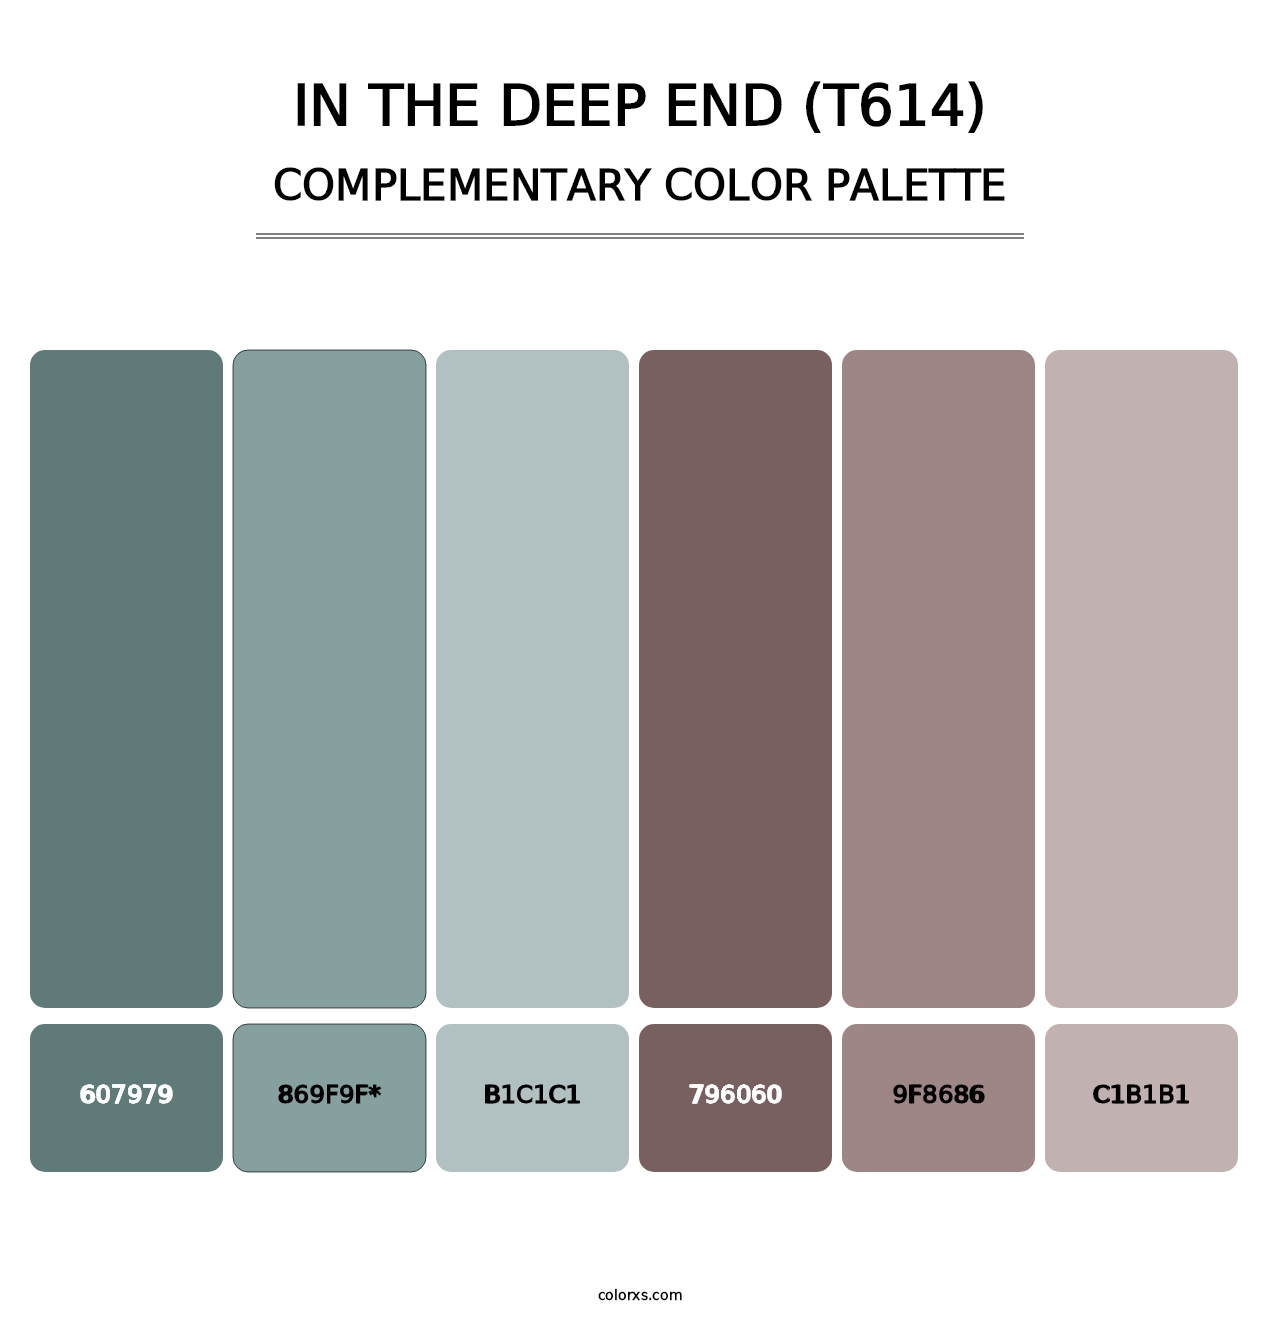 In the Deep End (T614) - Complementary Color Palette